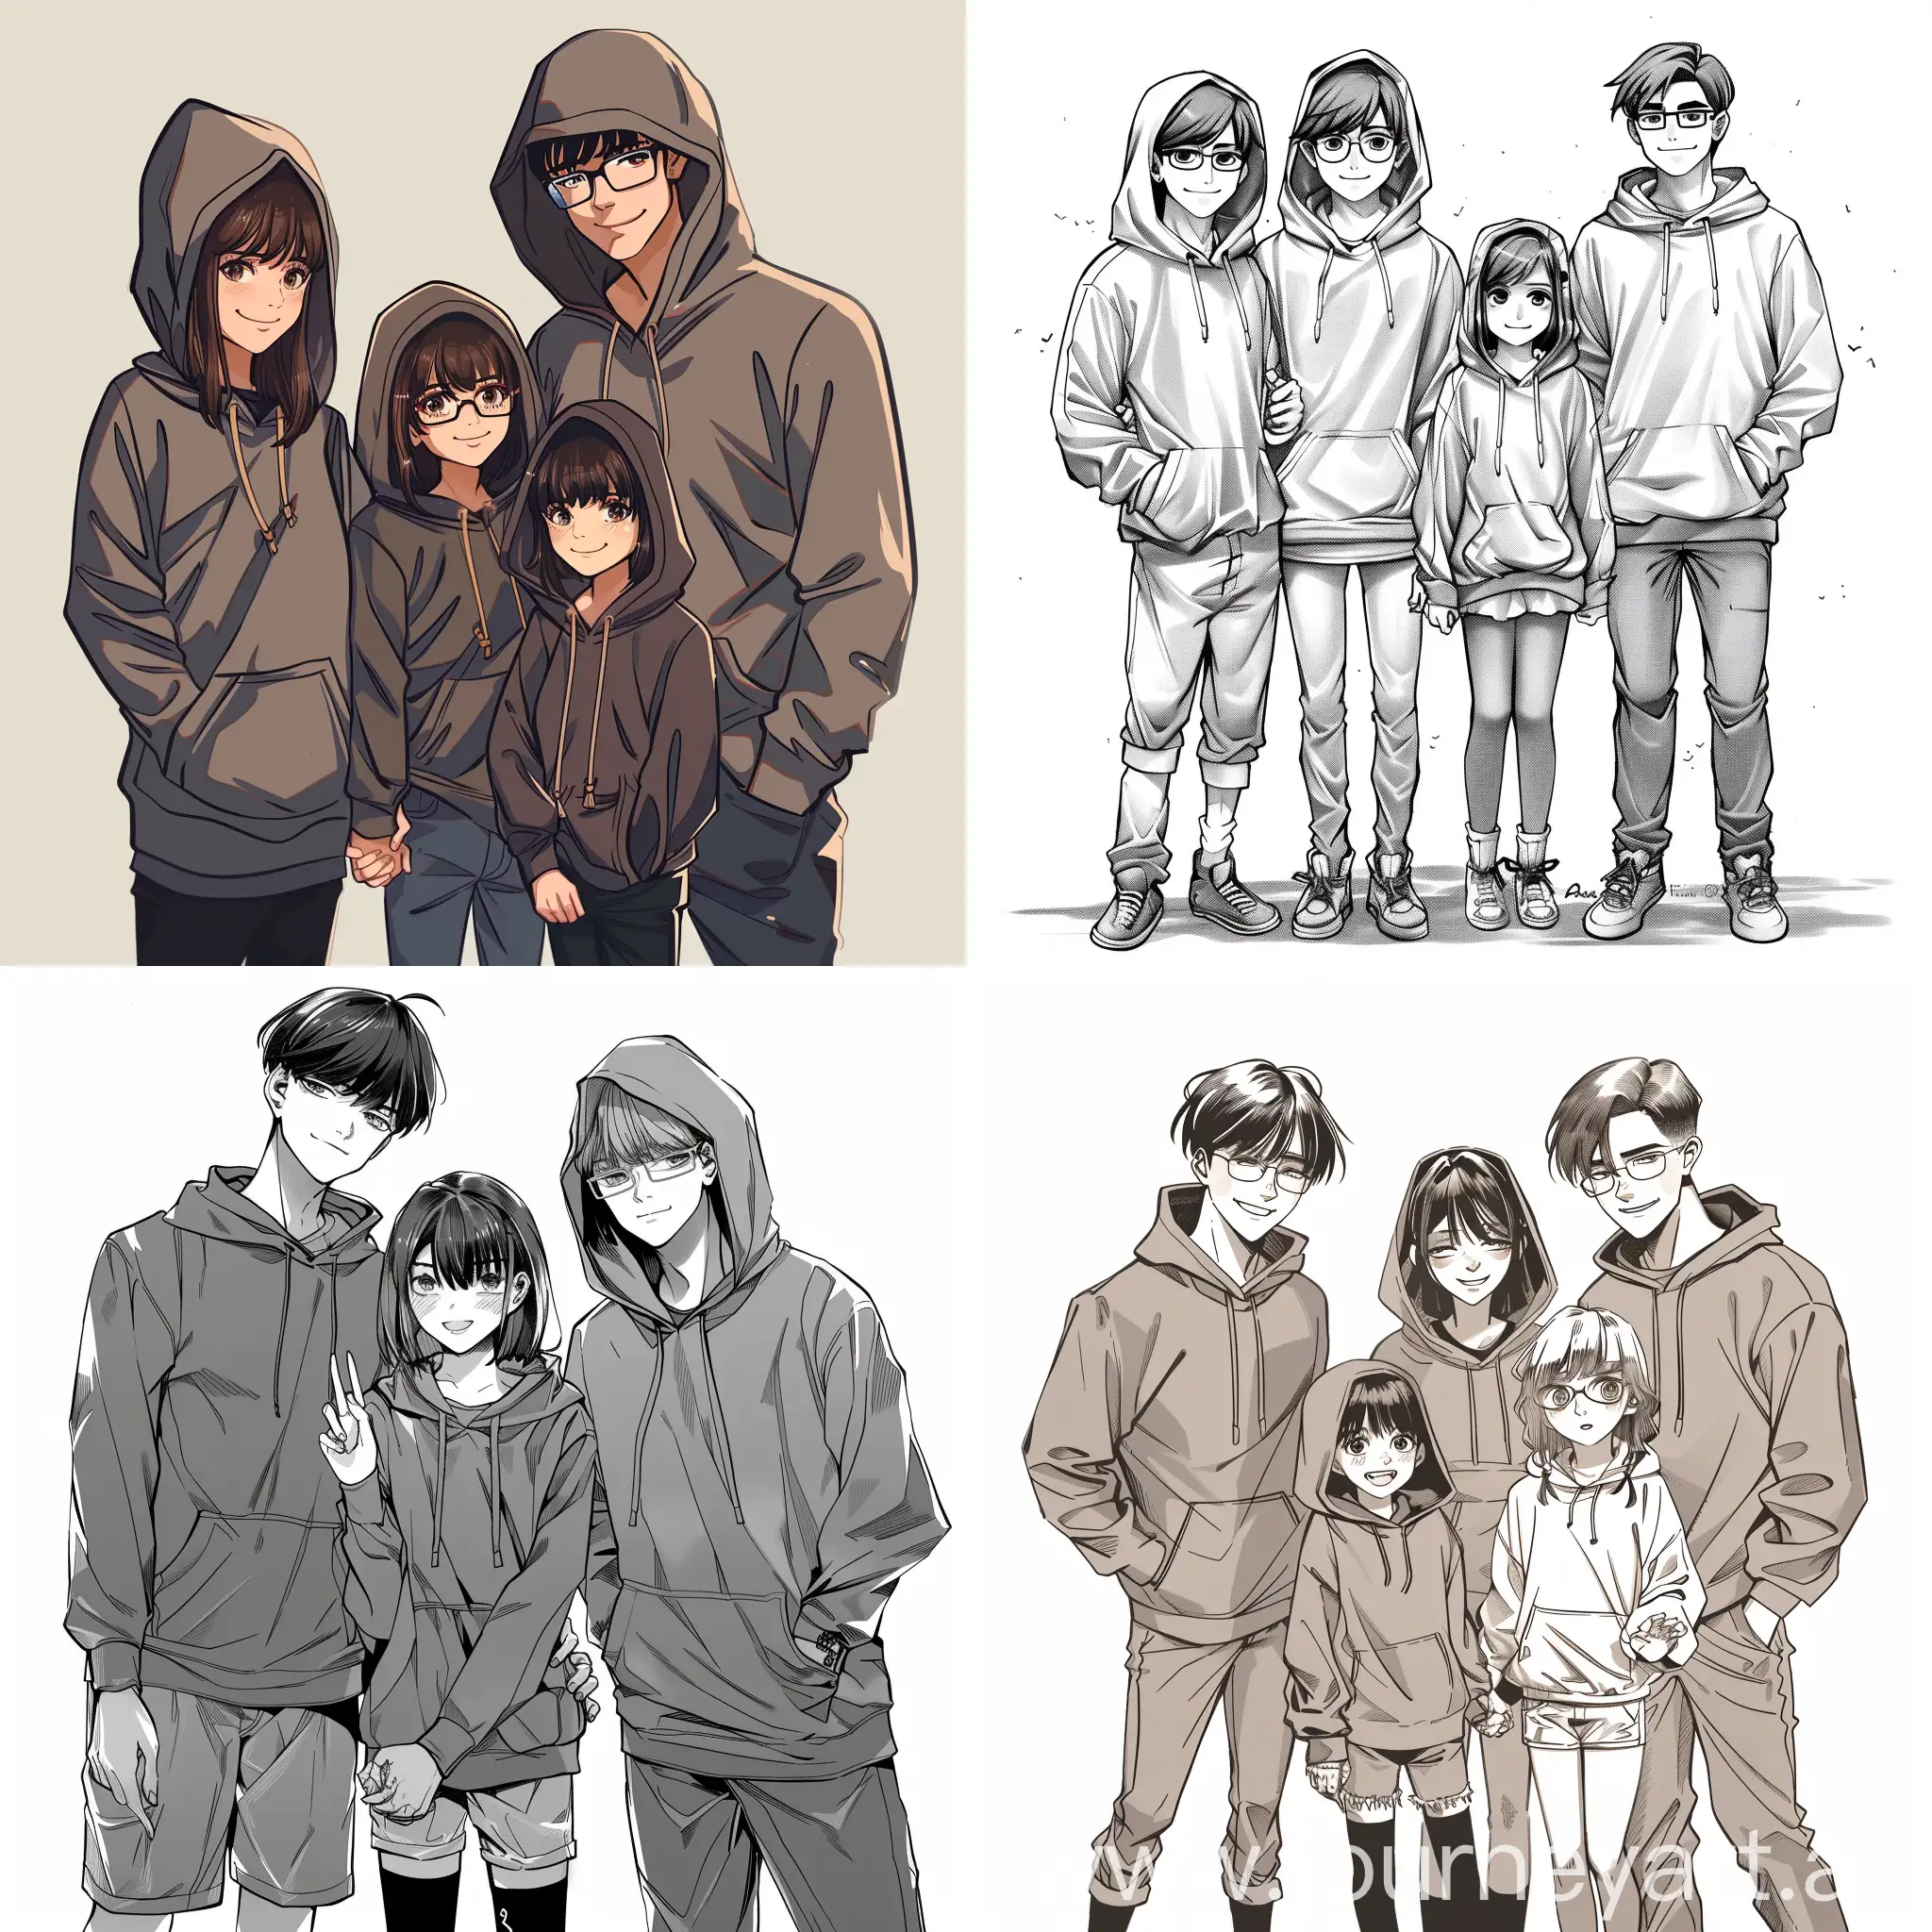 4 people are out on trip , to a cyber town the team consist of two boys and two girls, thier name is Sasha, asha, tom, peter. Sasha is 16 years old cute short girl with short girl wearing hoodie. Asha 16 years old is cute girl she also wears hoodie same as sasha. Asha and Saha was holding hands, tom is 17 years old boy tall and handsome wears hoodie and with long bangs on his forehead and wears glasses, he is childish type and smiles all the time. peter is 19 years old tall handsome boy, he dependable, he wears hoodie and he is often cold Don't smile much. They are good friends and posing together